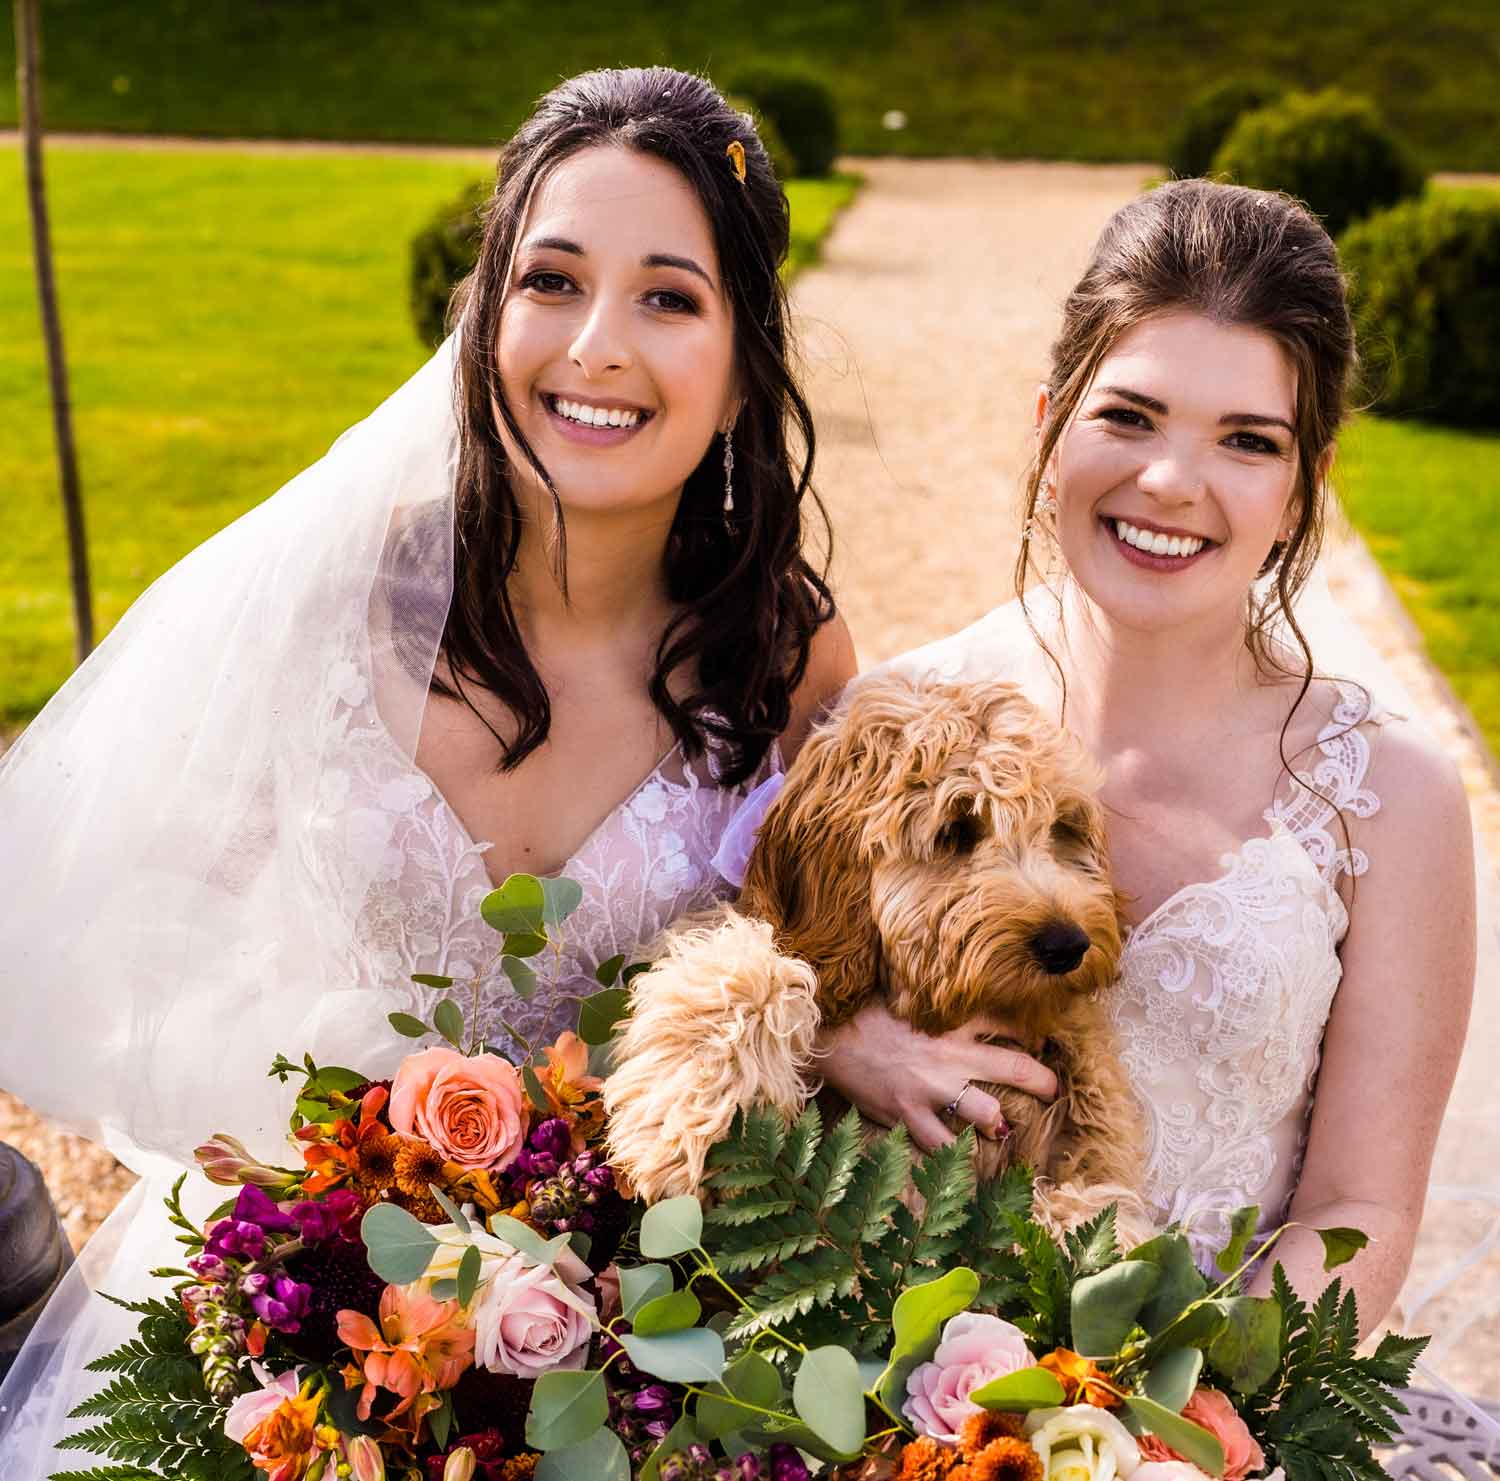 Featured image for “Dog Friendly Wedding Venue”